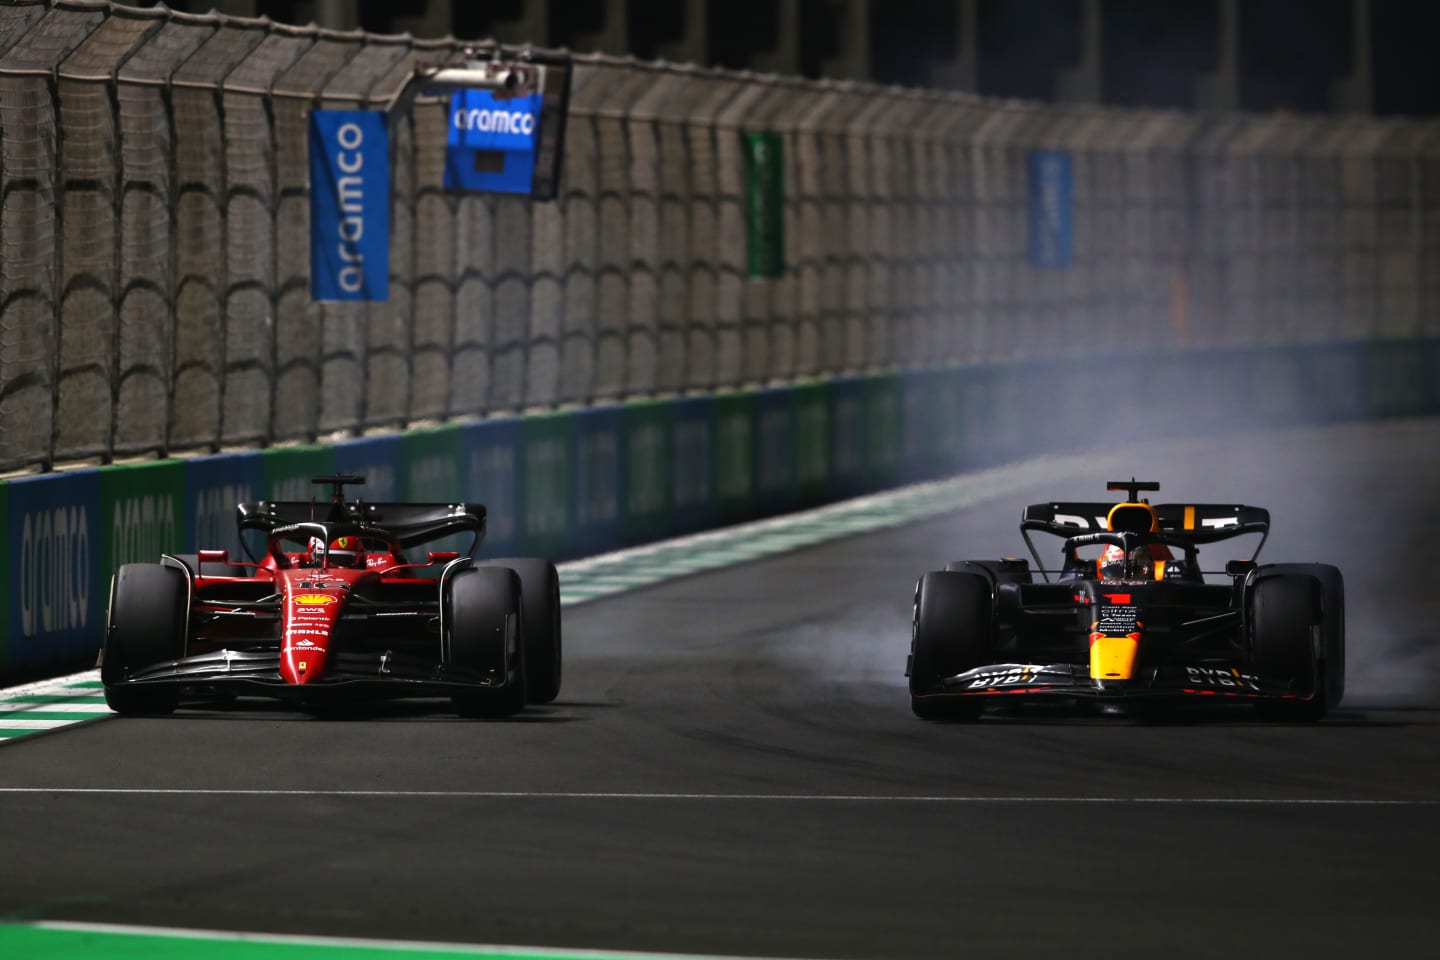 JEDDAH, SAUDI ARABIA - MARCH 27: Max Verstappen of the Netherlands driving the (1) Oracle Red Bull Racing RB18 and Charles Leclerc of Monaco driving (16) the Ferrari F1-75 battle for track position during the F1 Grand Prix of Saudi Arabia at the Jeddah Corniche Circuit on March 27, 2022 in Jeddah, Saudi Arabia. (Photo by Joe Portlock - Formula 1/Formula 1 via Getty Images)